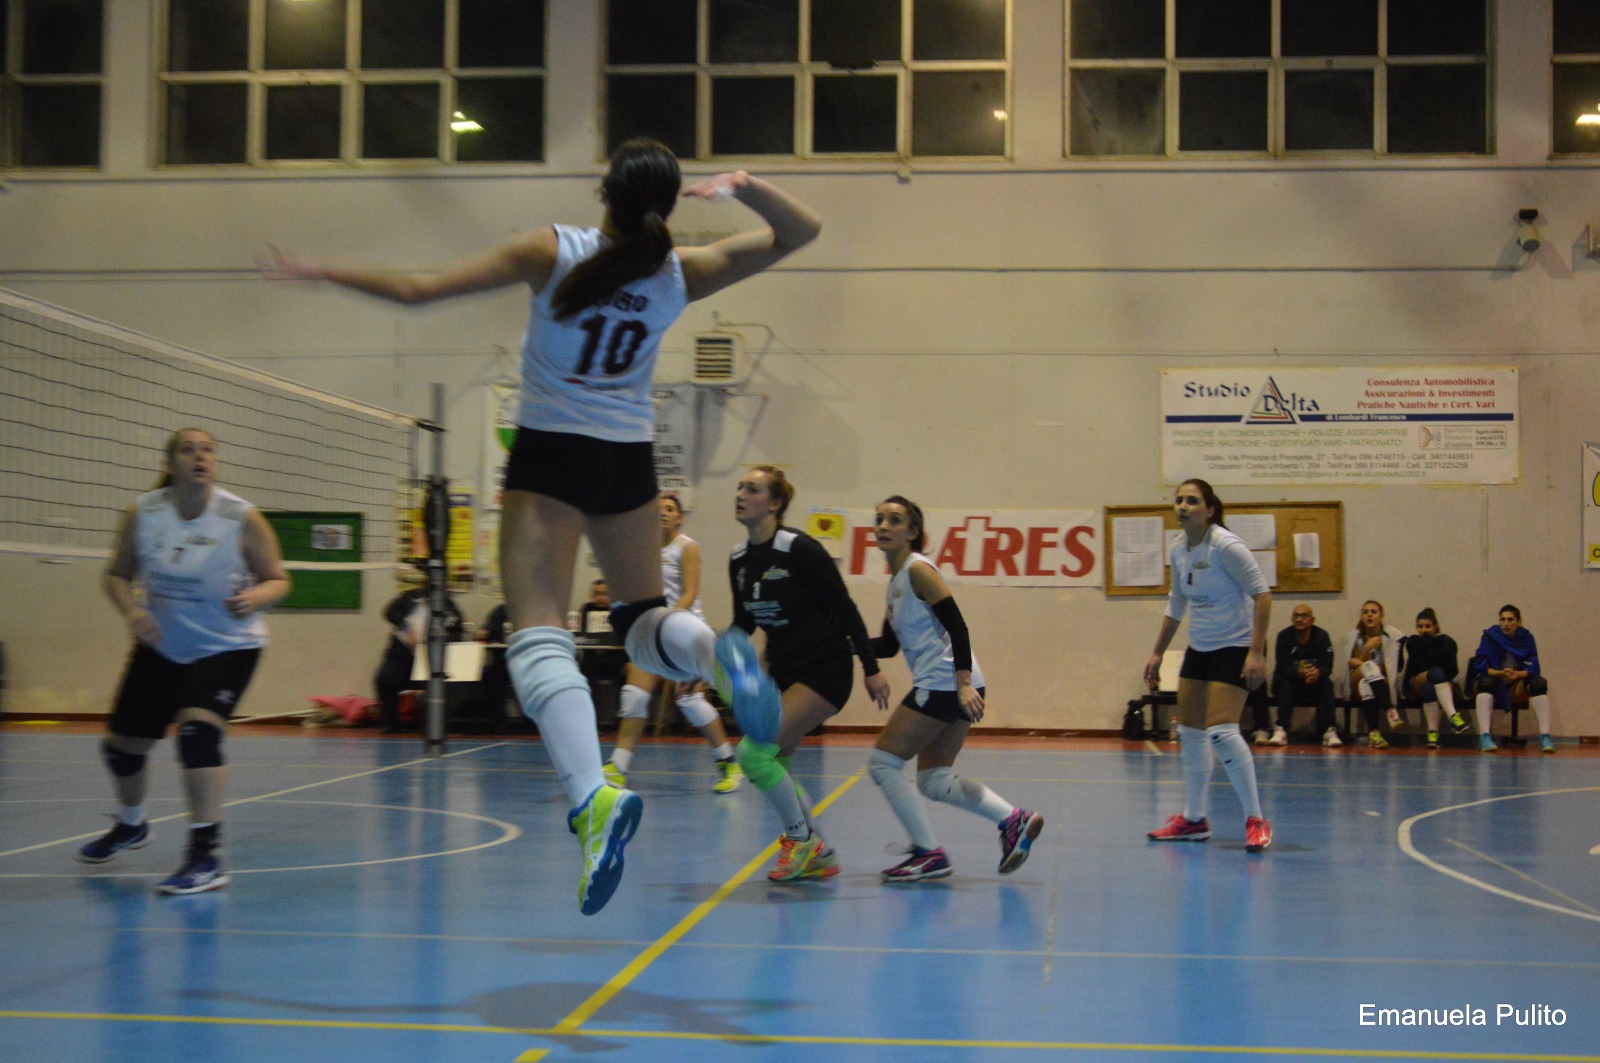 Argese Volley Crispiano